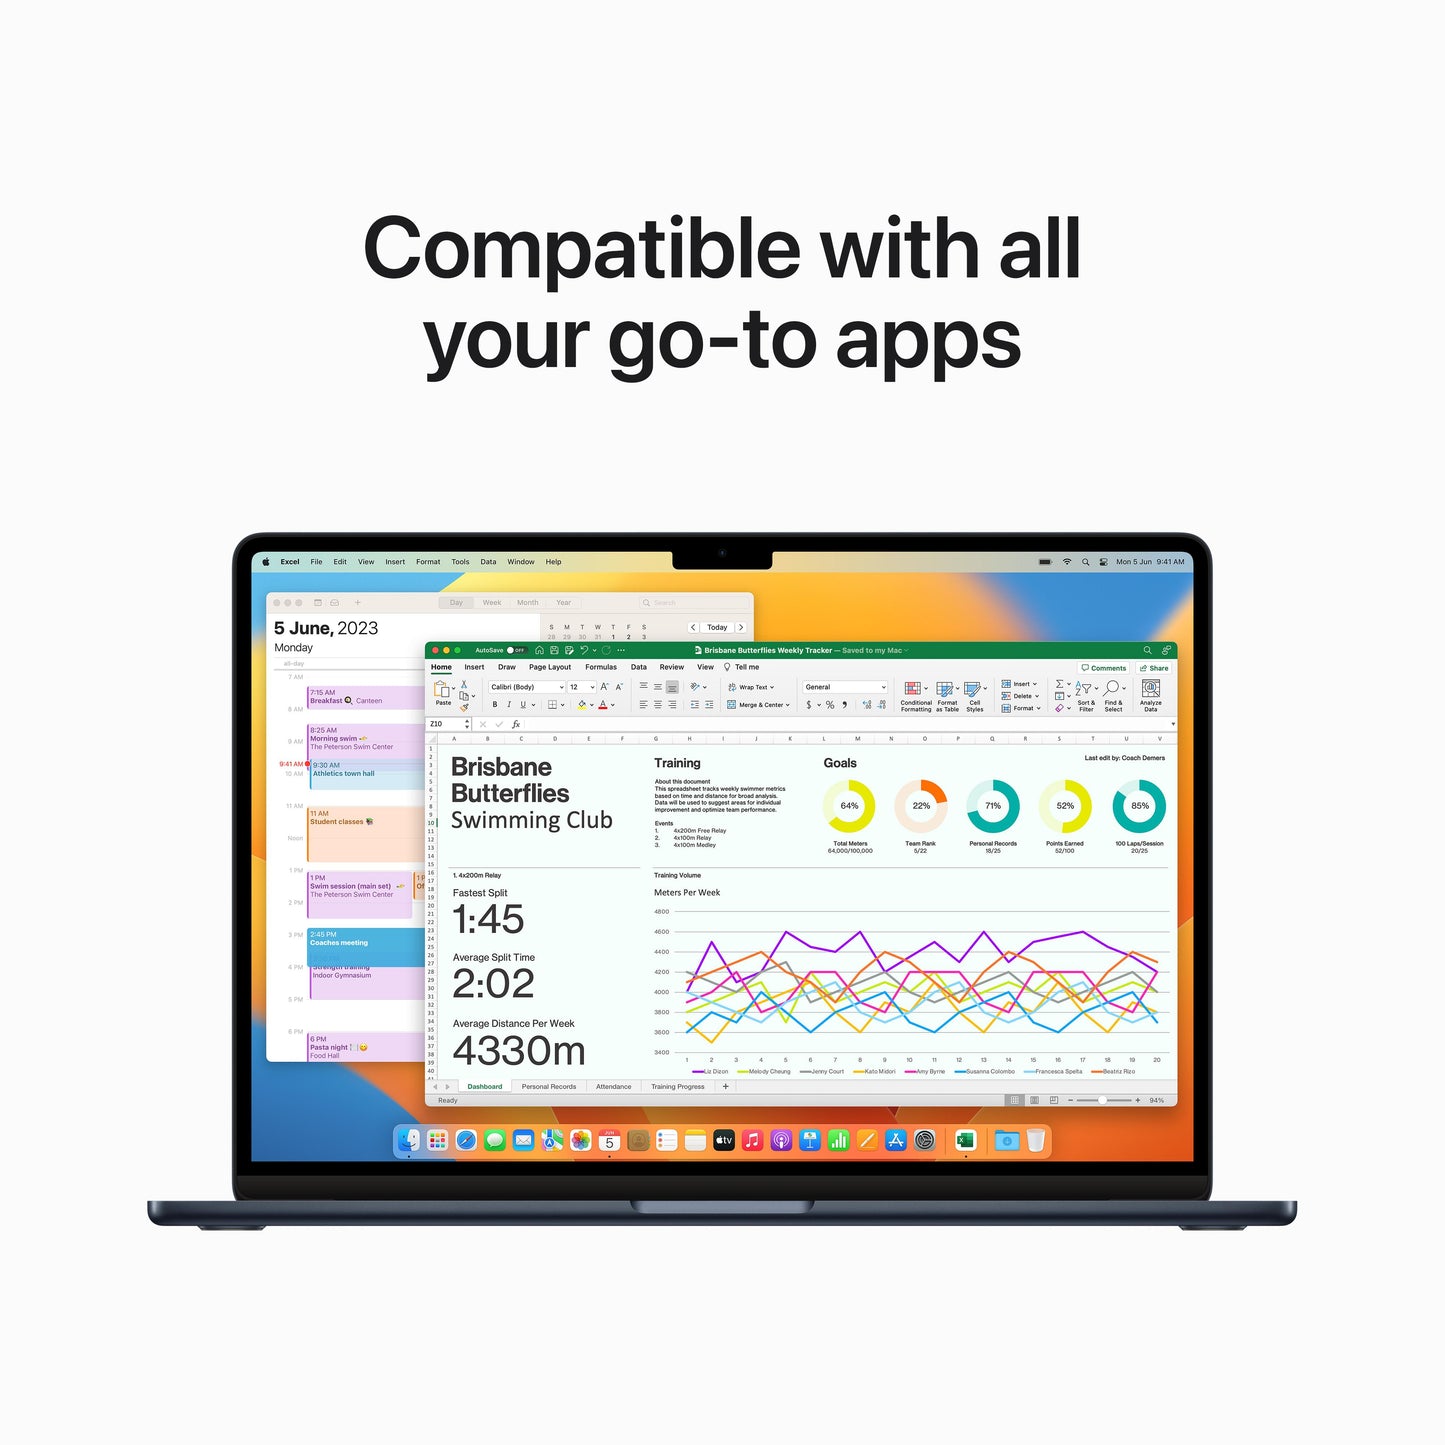 15-inch MacBook Air: Apple M2 chip with 8_core CPU and 10_core GPU, 512GB SSD - Midnight